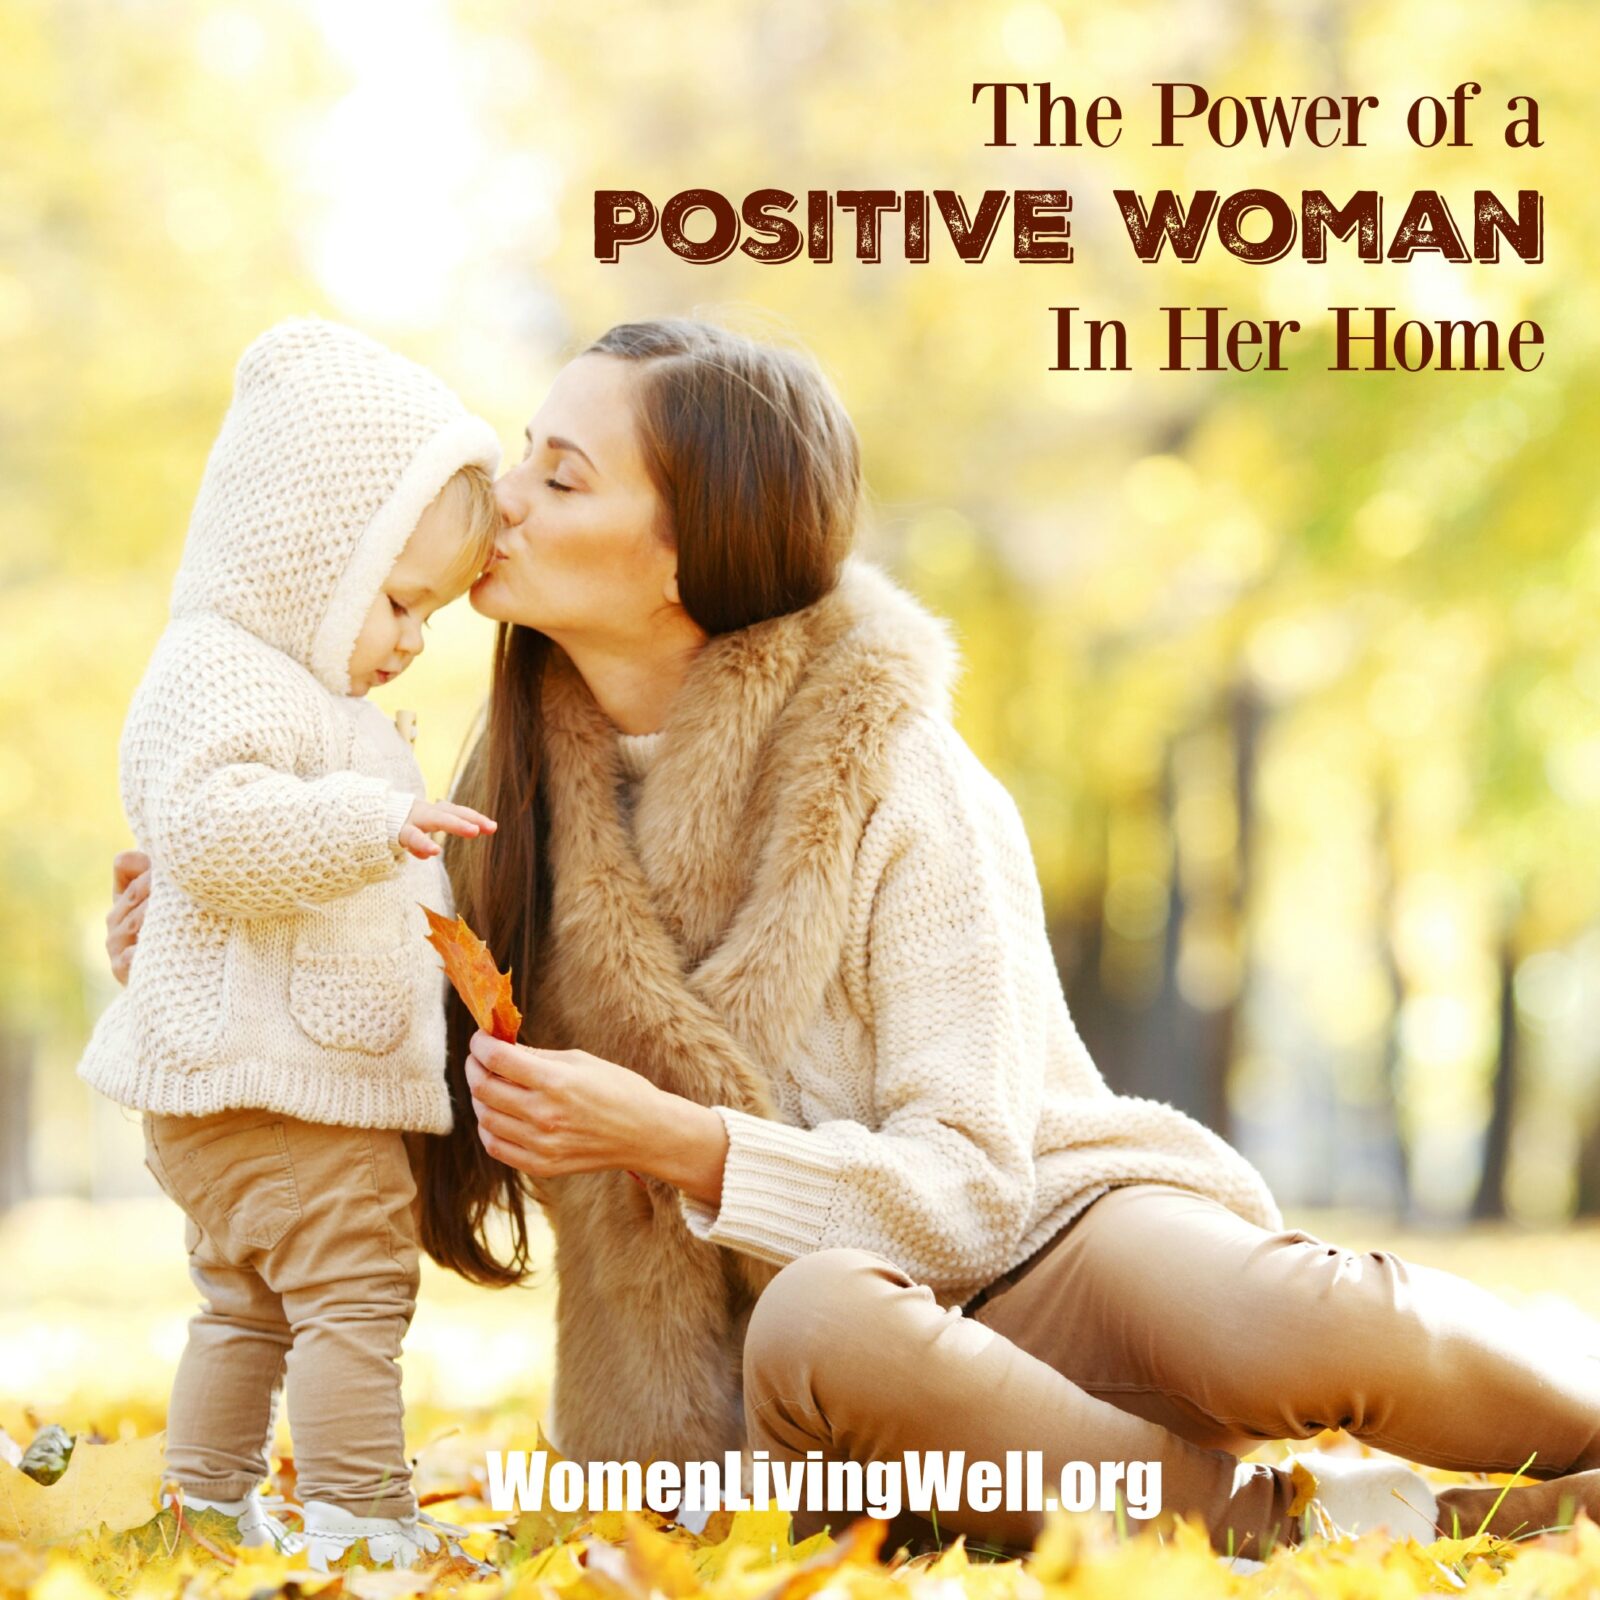 The Power of a Positive Woman in Her Home